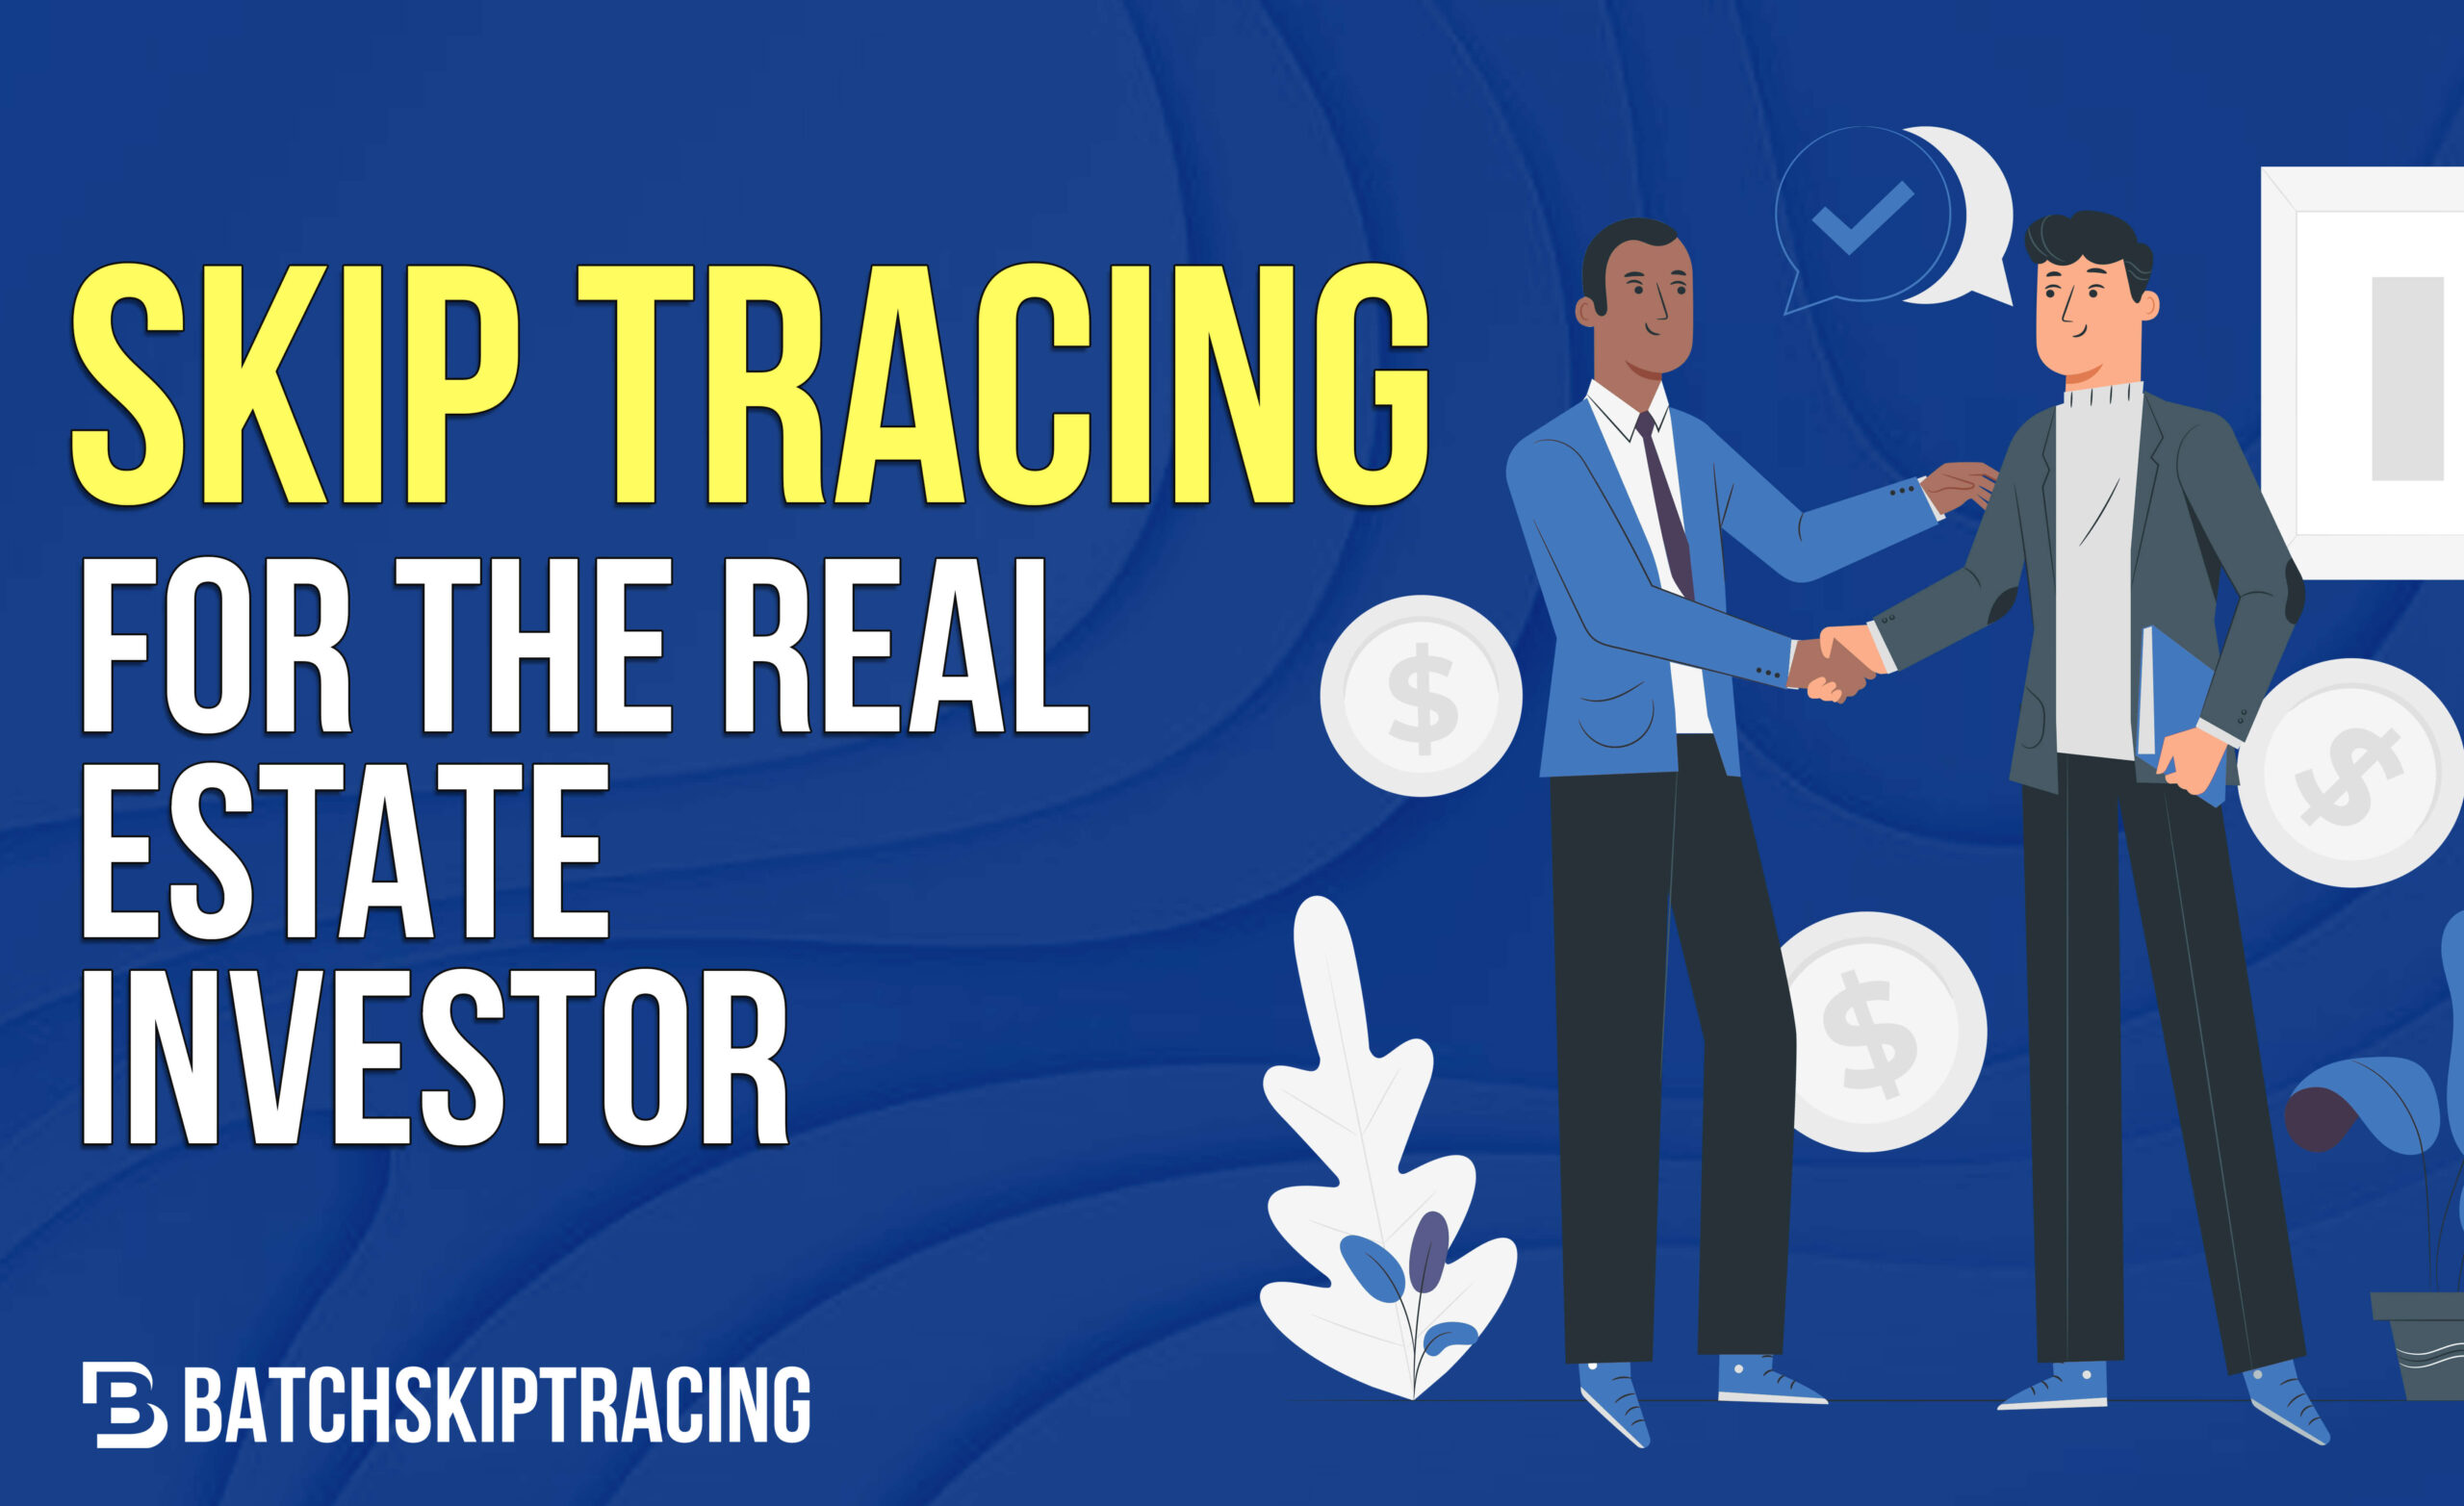 Skip Tracing for the Real Estate Investor